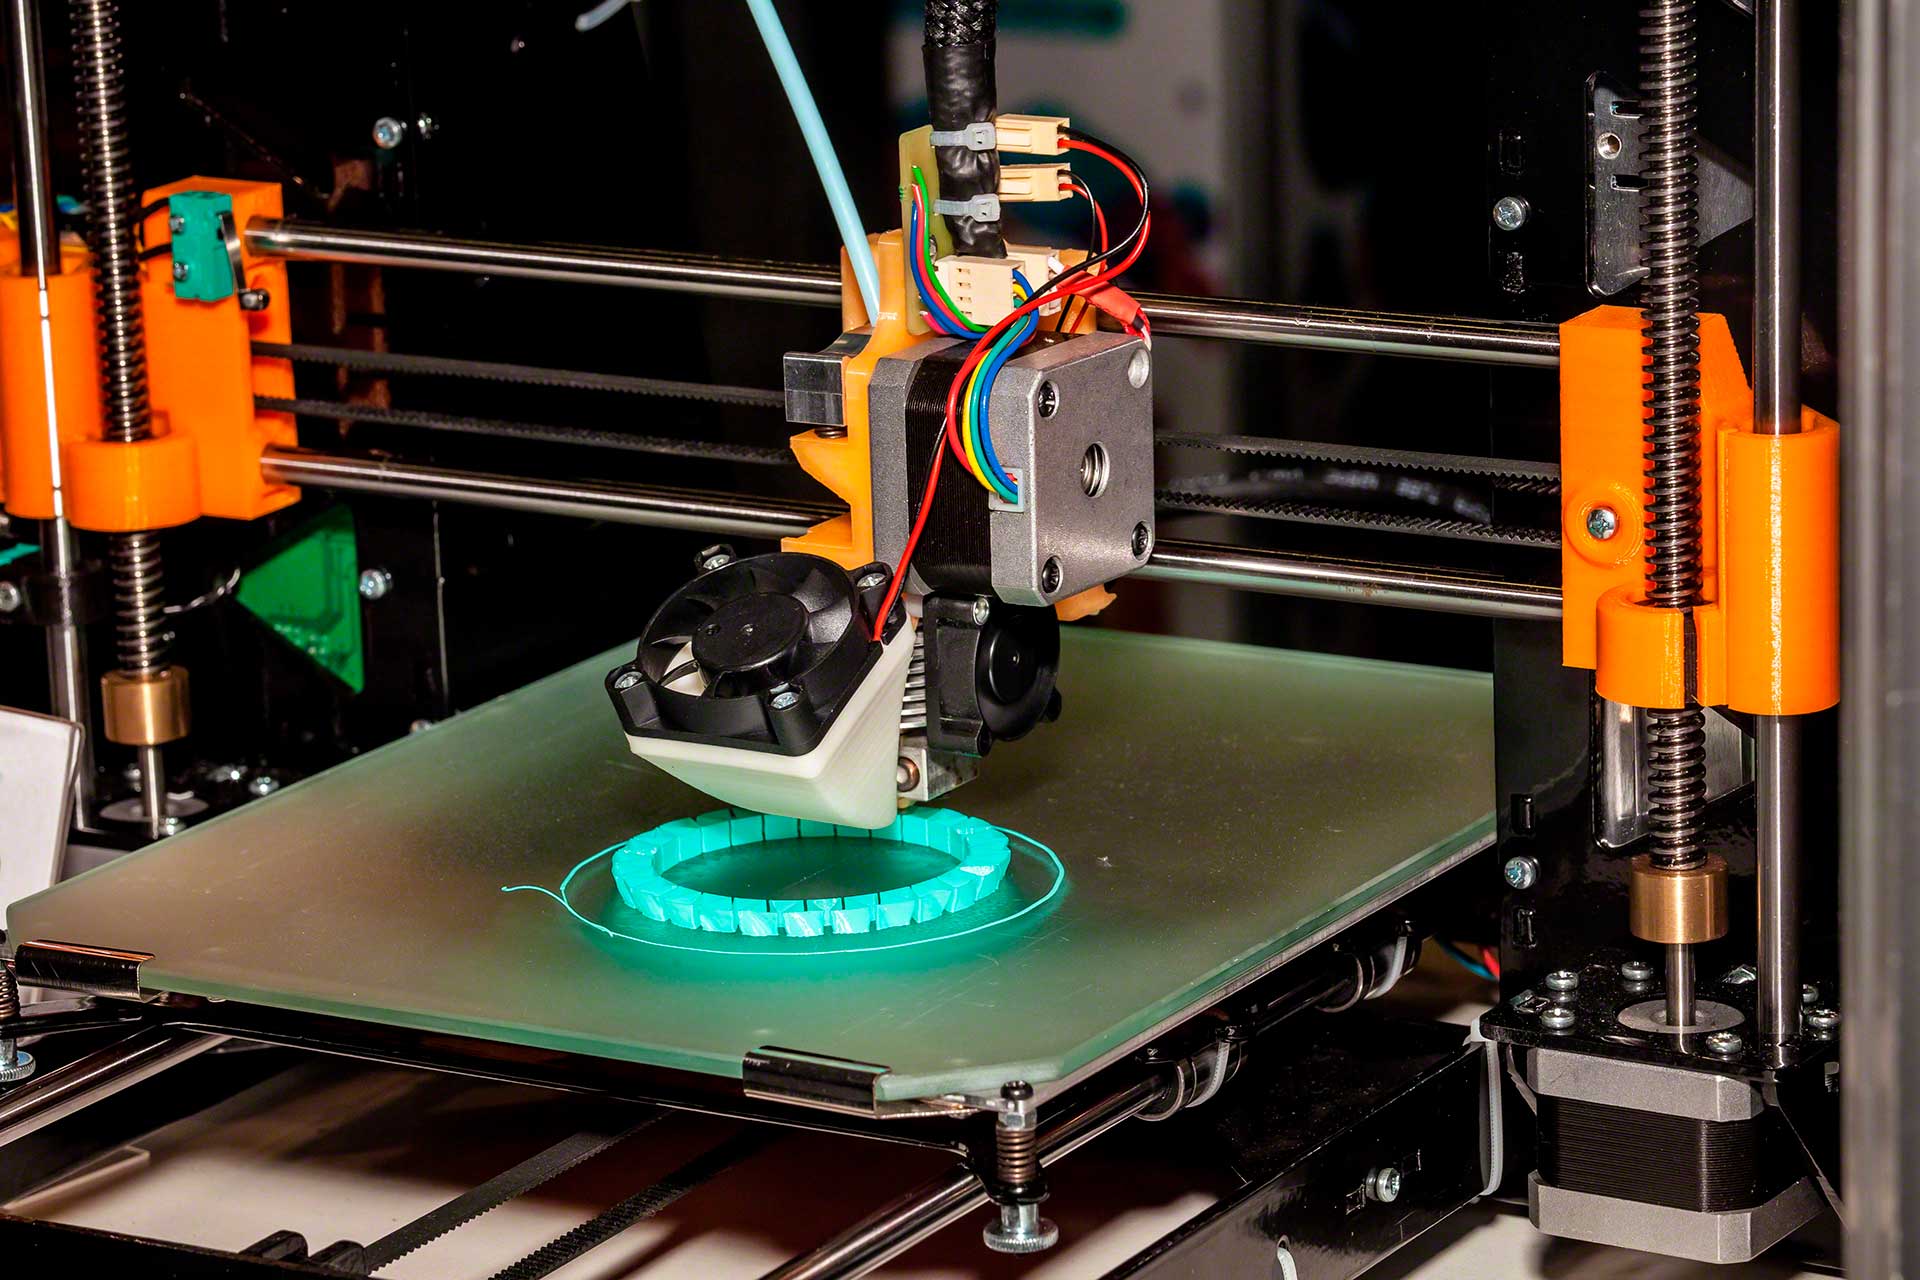 3D printing takes supply chain management into a new dimension